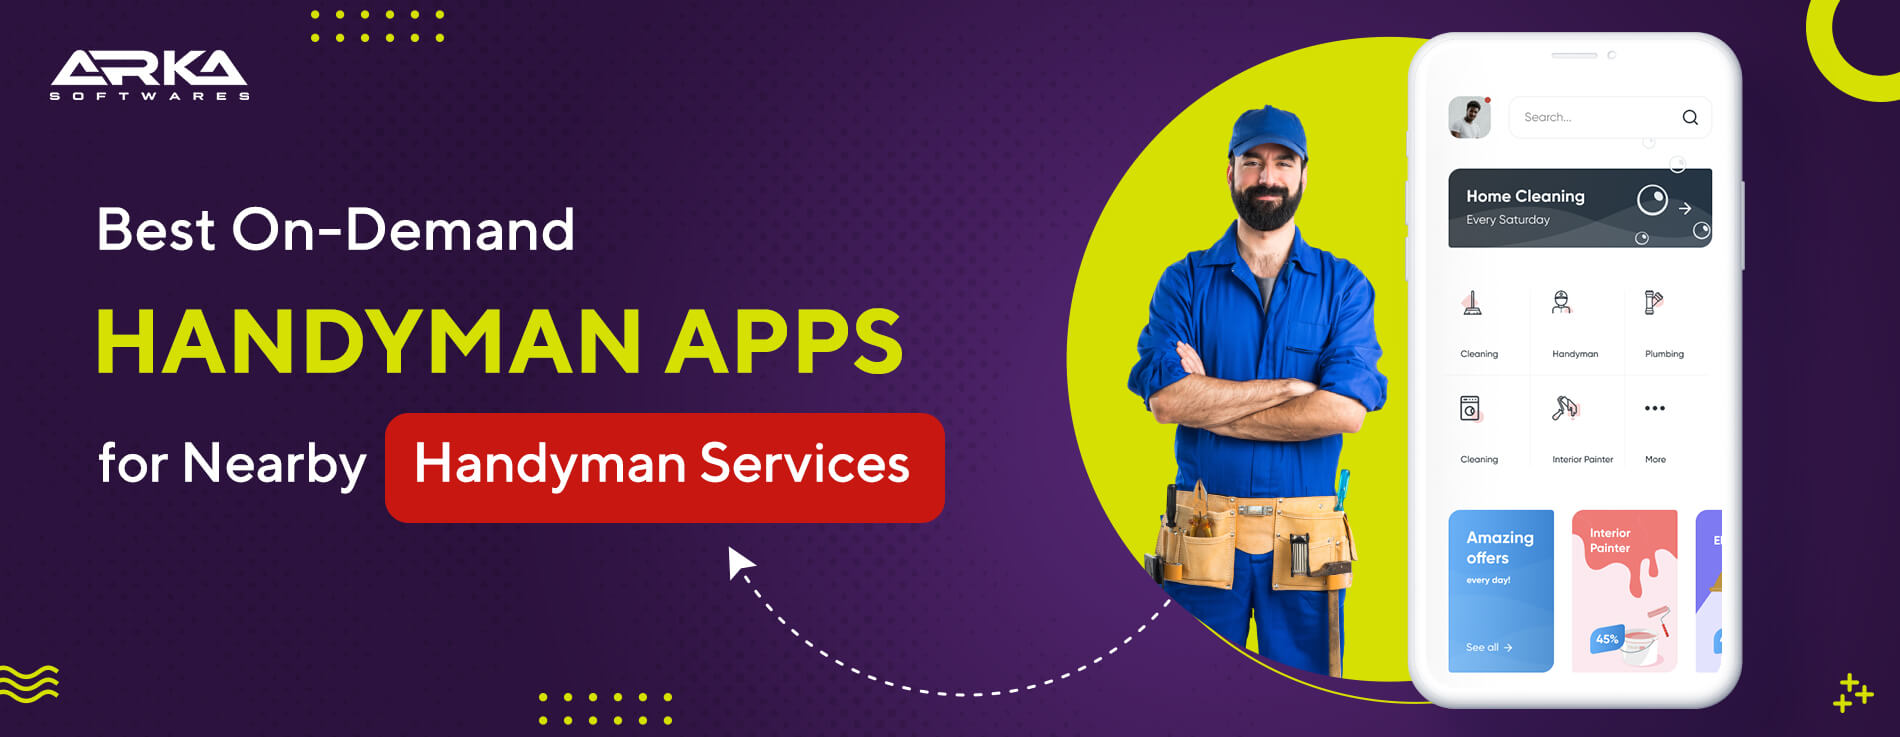 On-Demand Handyman Apps For Nearby Handyman Services